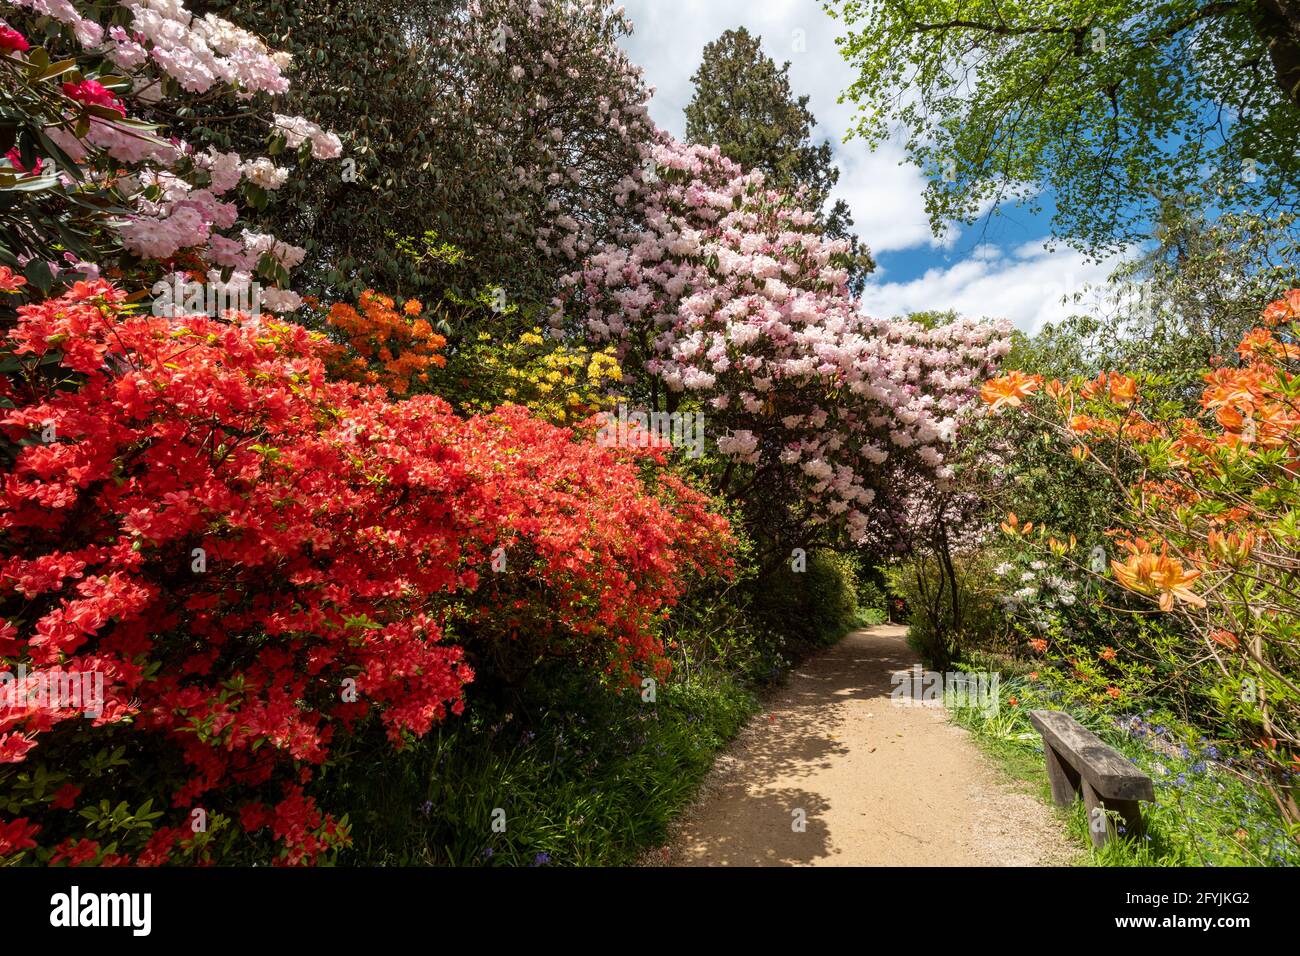 Colourful flowering shrubs at Leonardslee Gardens in West Sussex, England, UK, during May or Spring Stock Photo